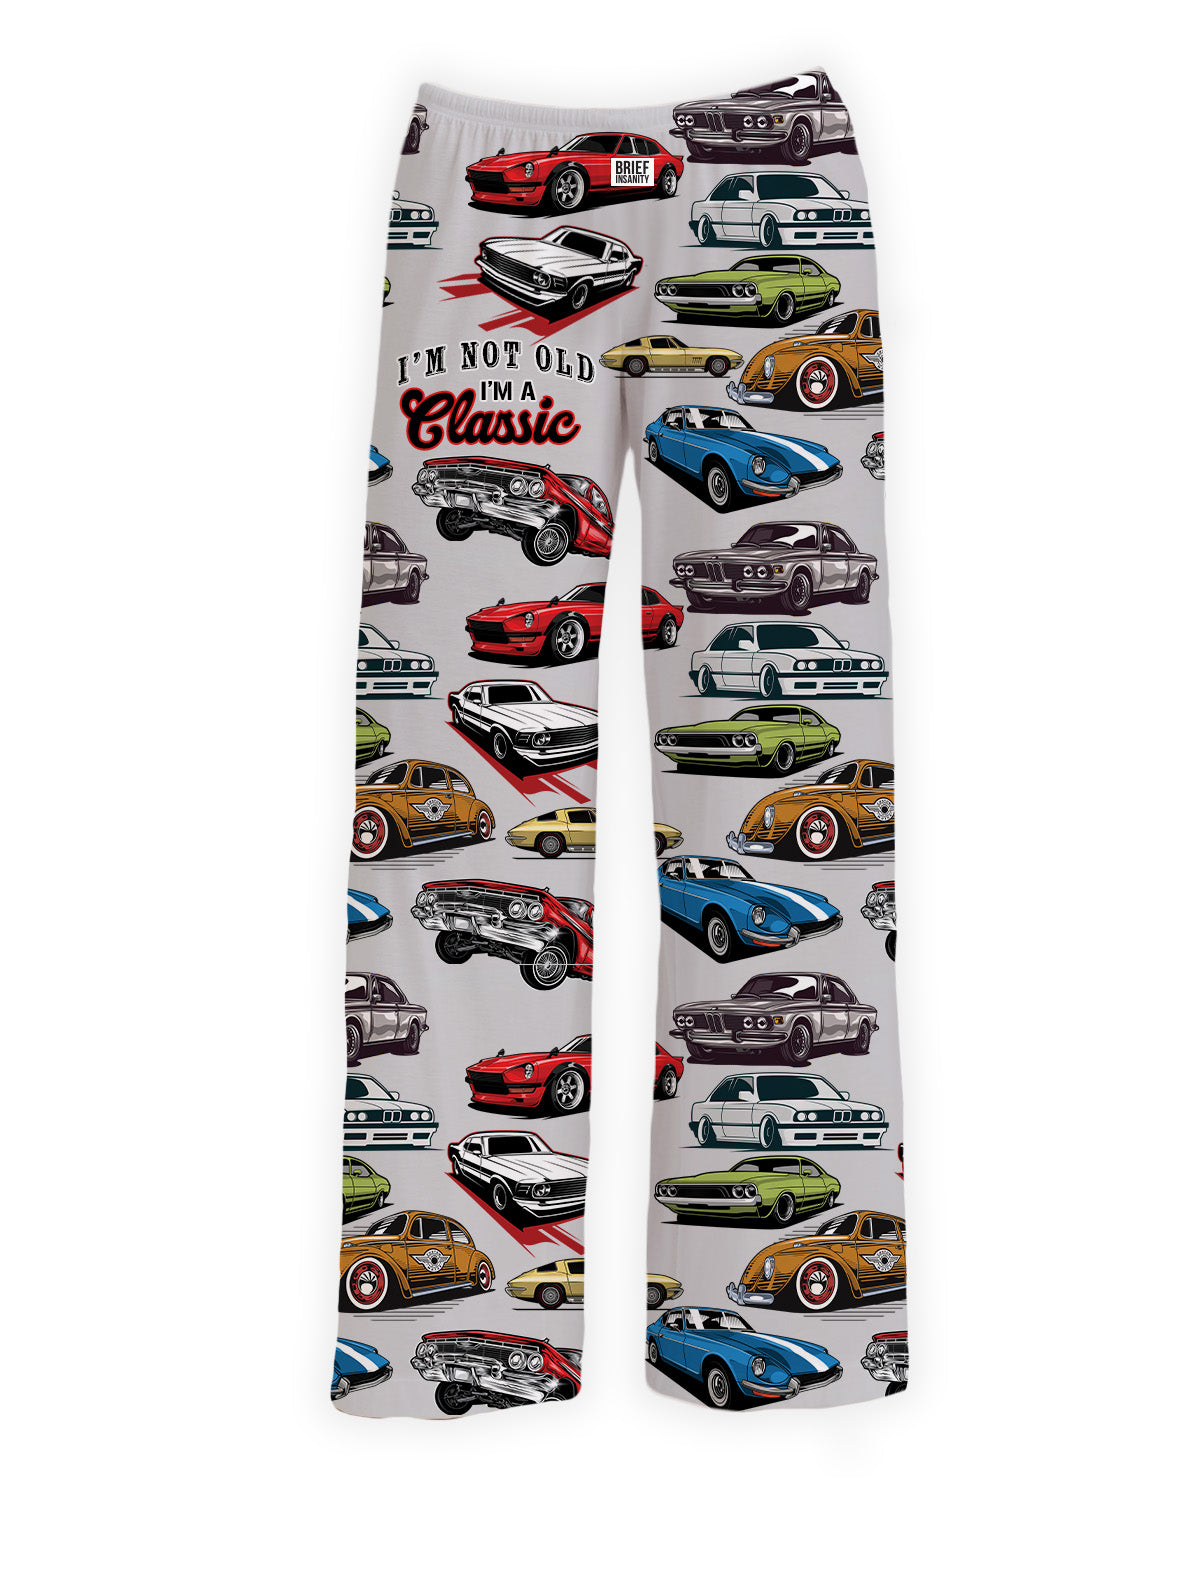 BRIEF INSANITY's I'm Not Old I'm A Classic Pajama Lounge Pants